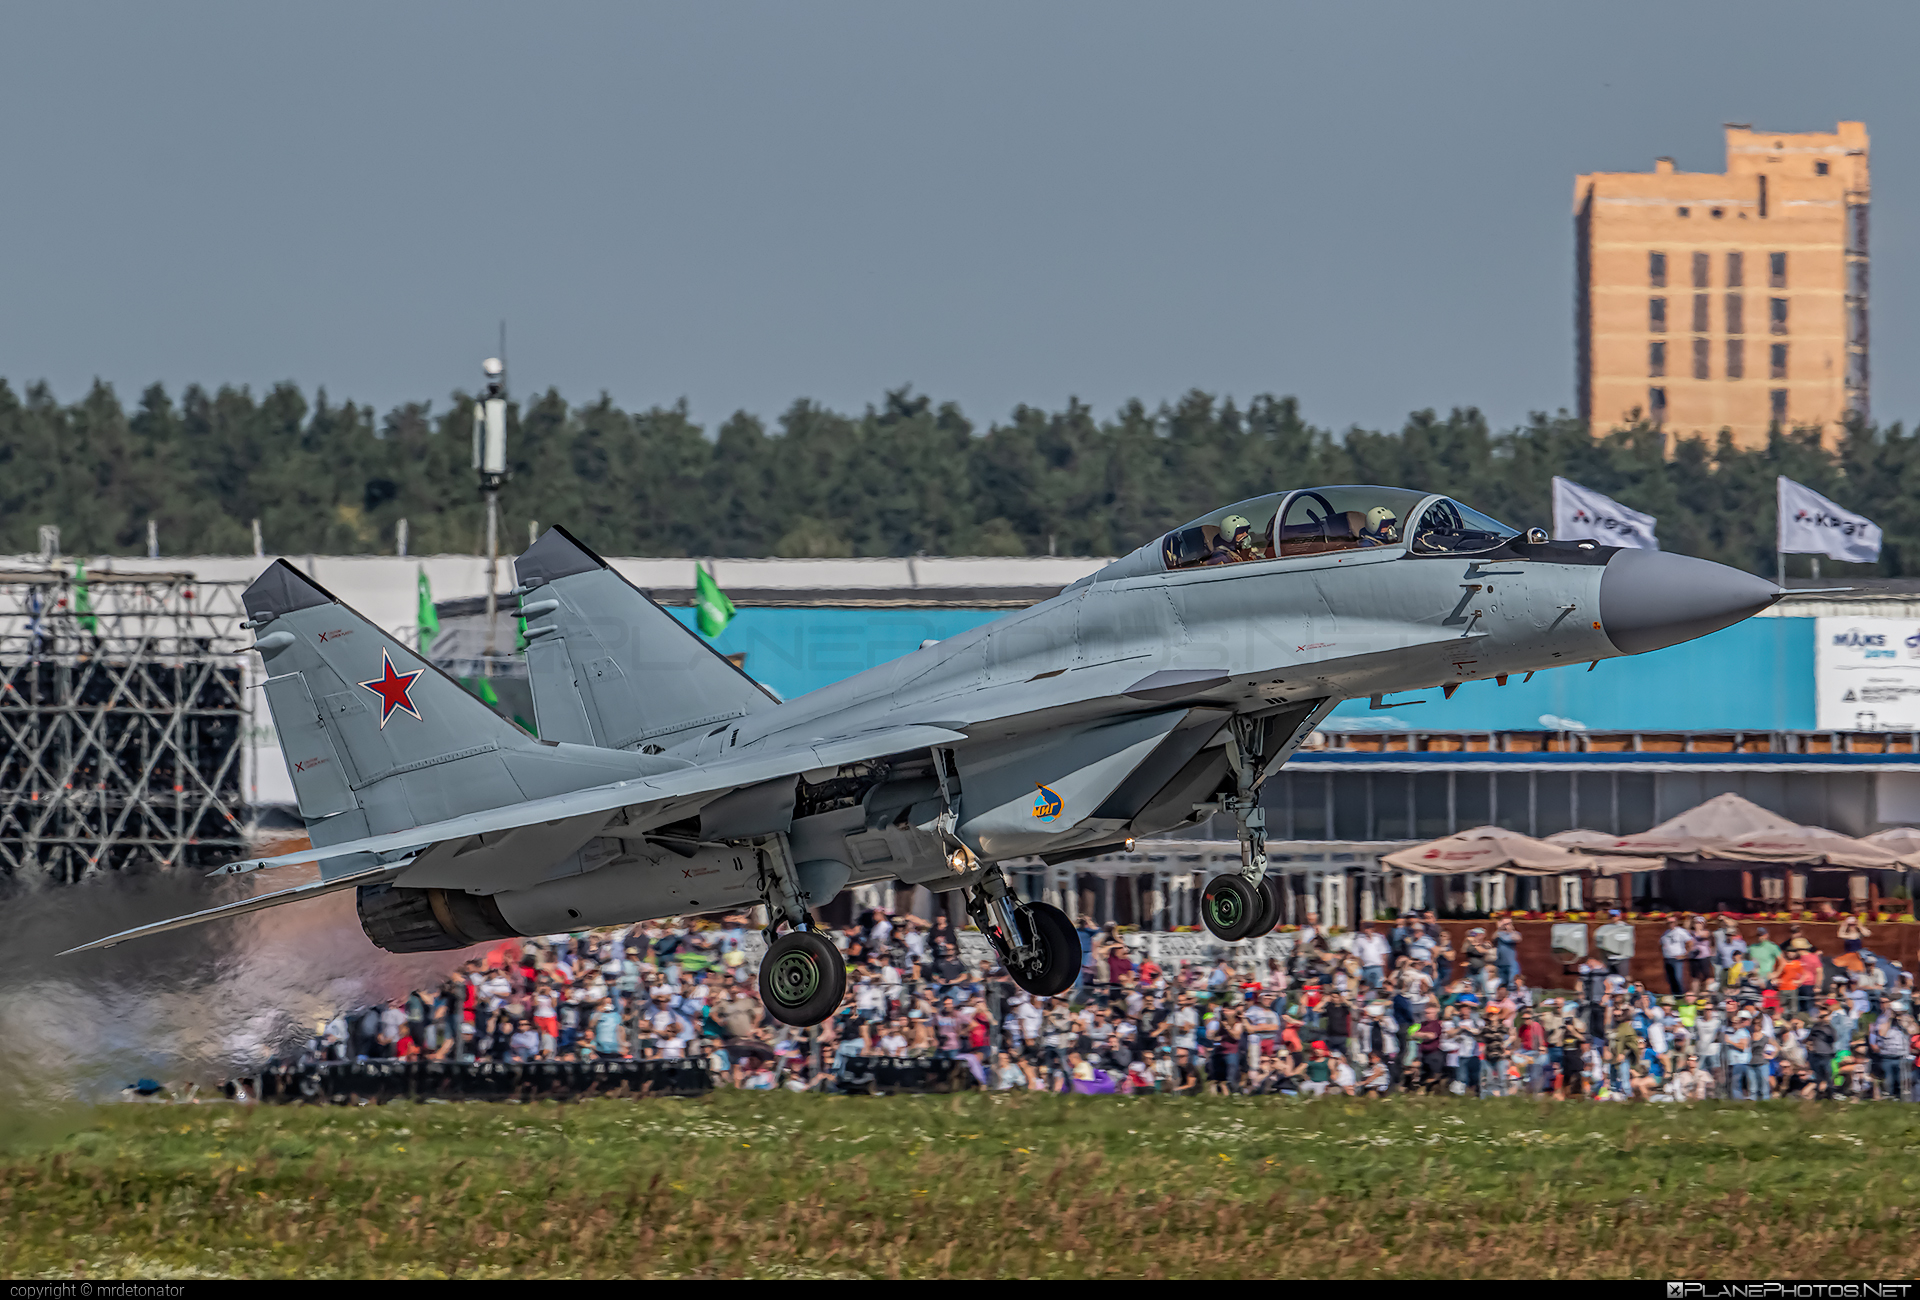 Mikoyan-Gurevich MiG-29M2 - 747 operated by RSK MiG #maks2019 #mig #mig29 #mig29m2 #mikoyangurevich #rskmig